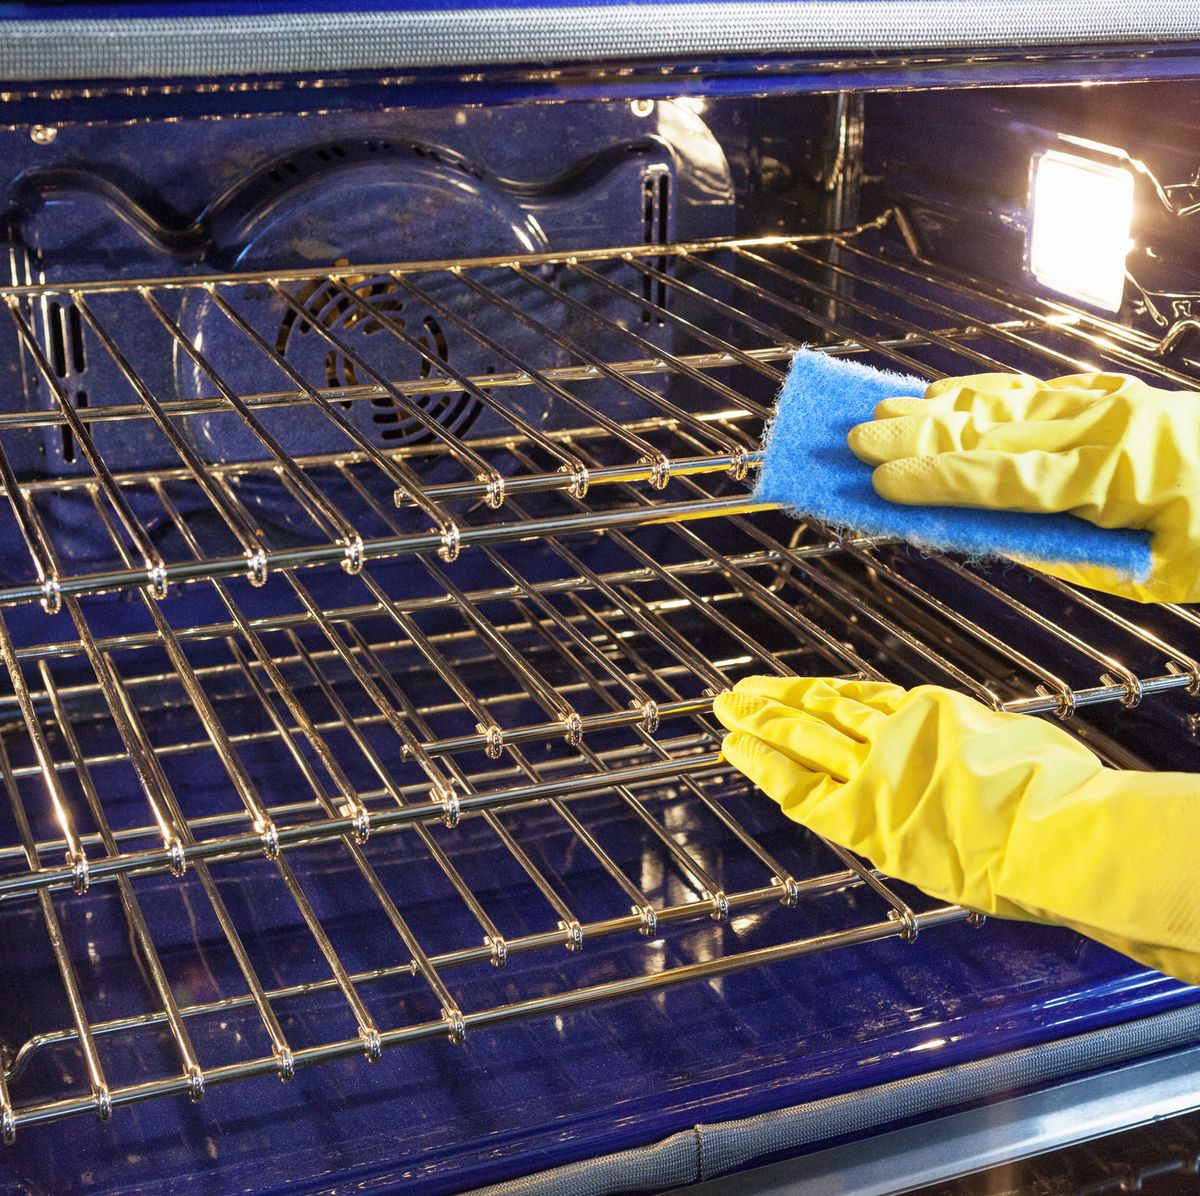 Self Cleaning Ovens Hazards - Smoke Fumes & Fires